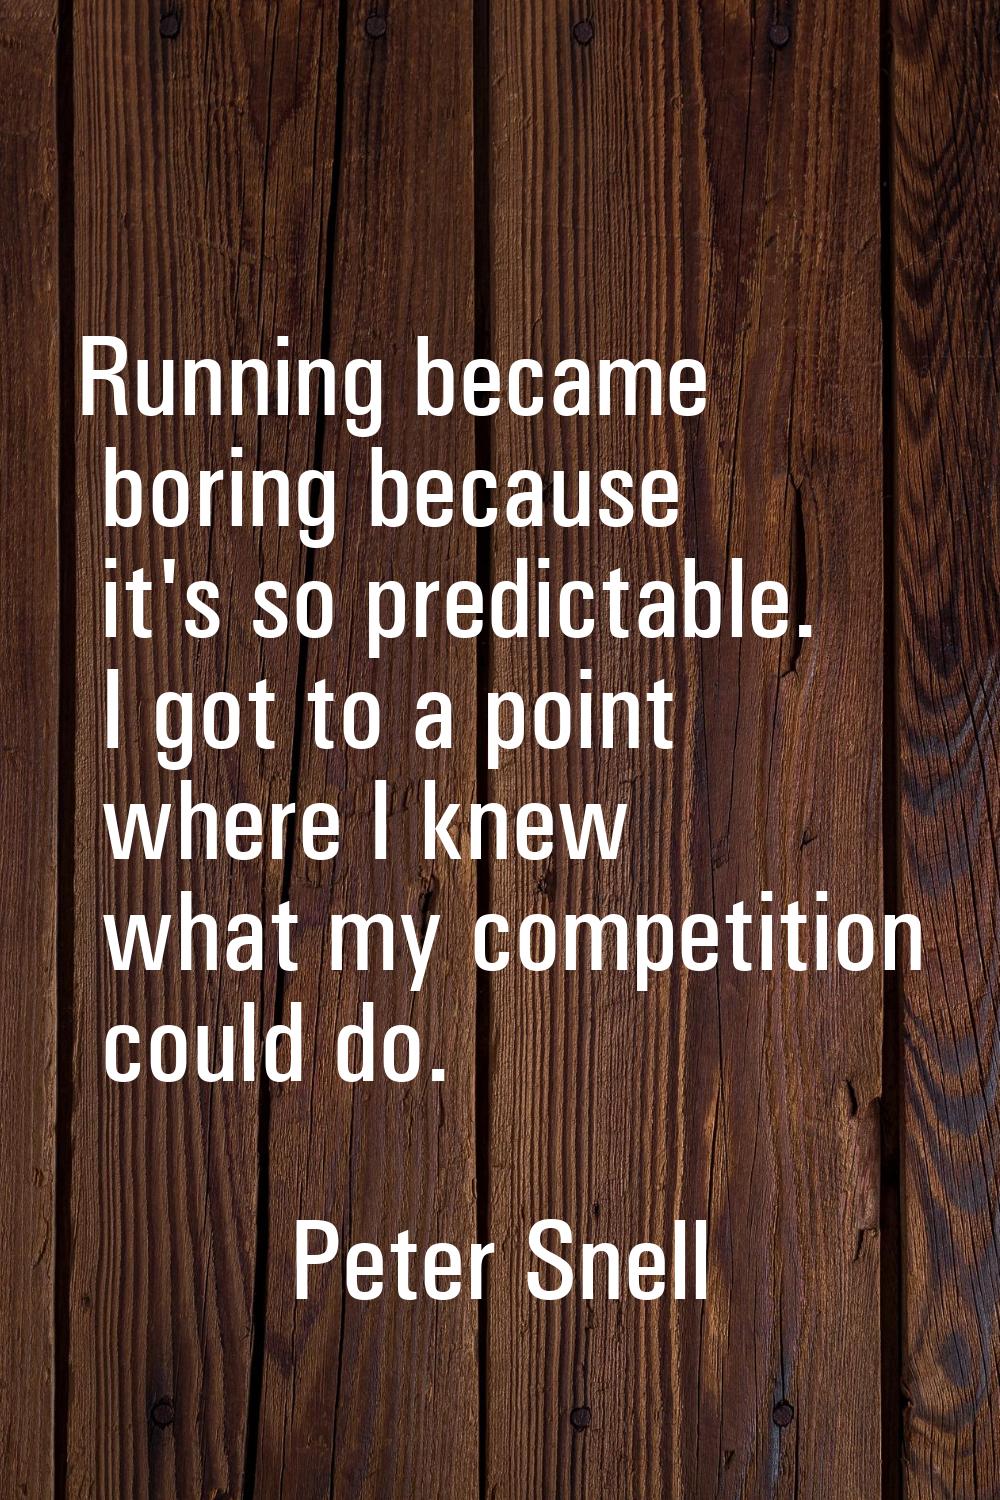 Running became boring because it's so predictable. I got to a point where I knew what my competitio